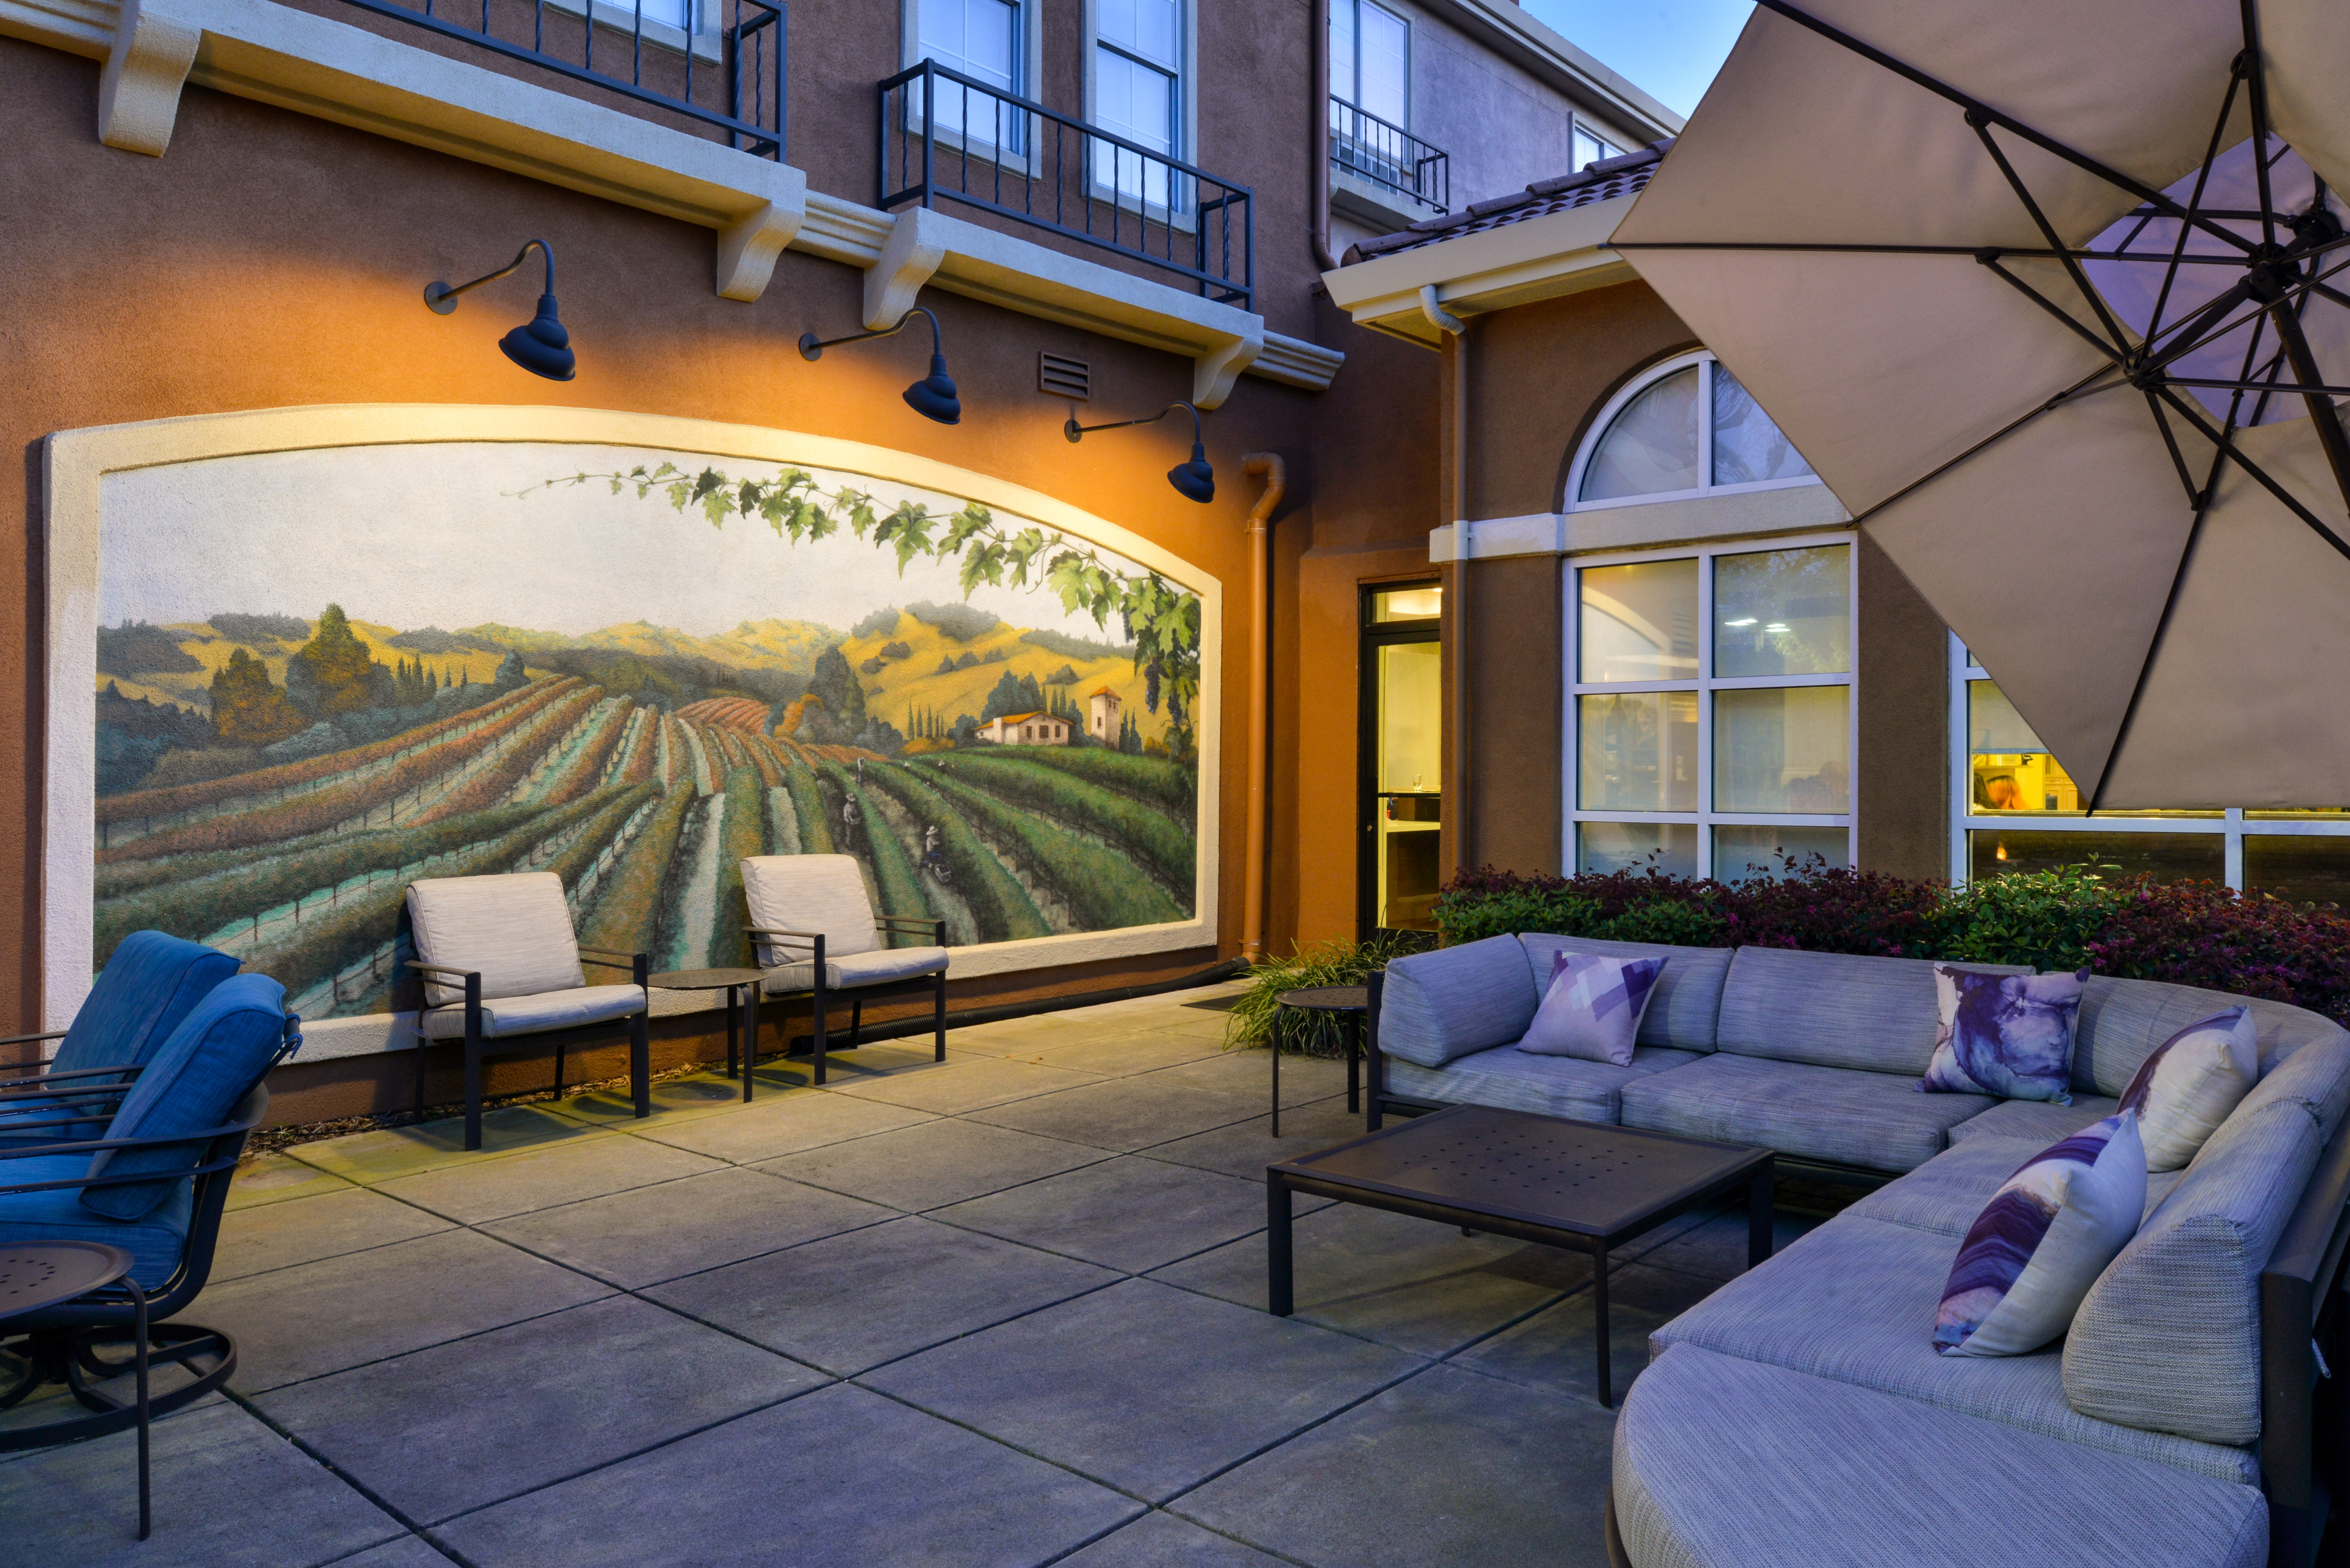 outdoor patio, lounge chairs, vineyard wall mural